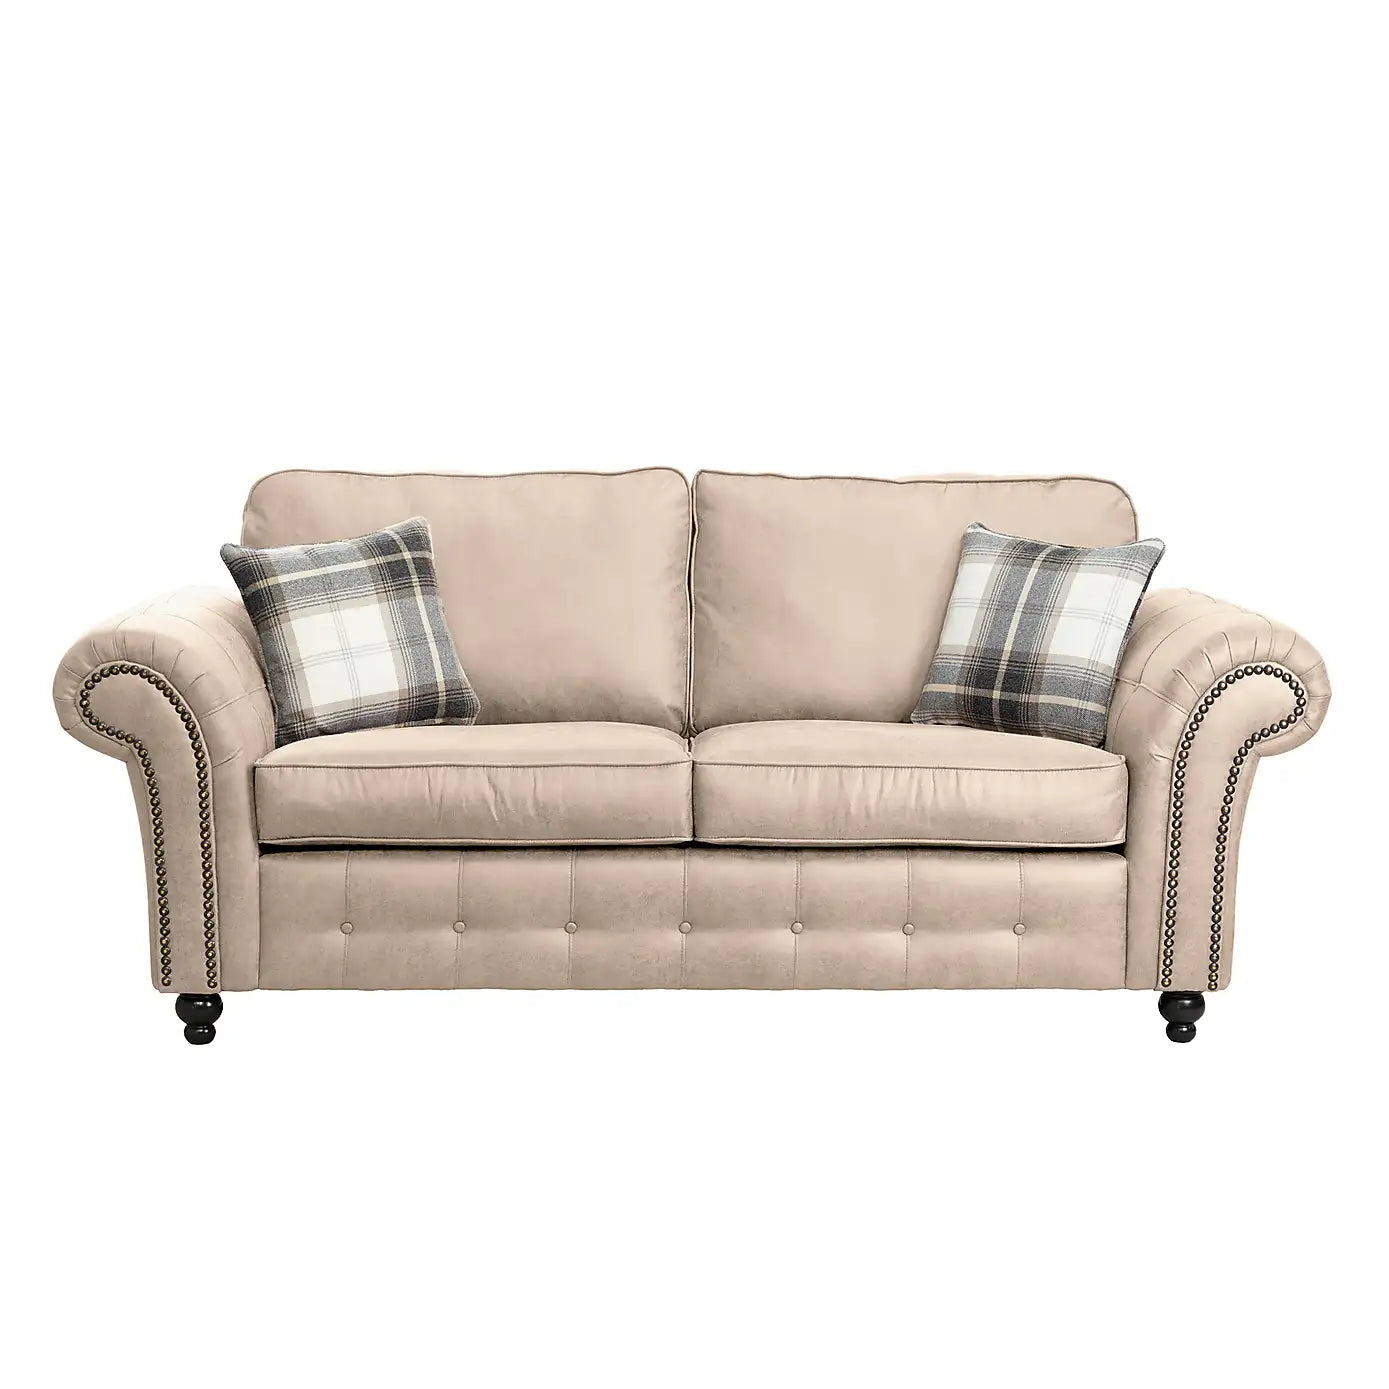 Oakland Leather Sofa Collection